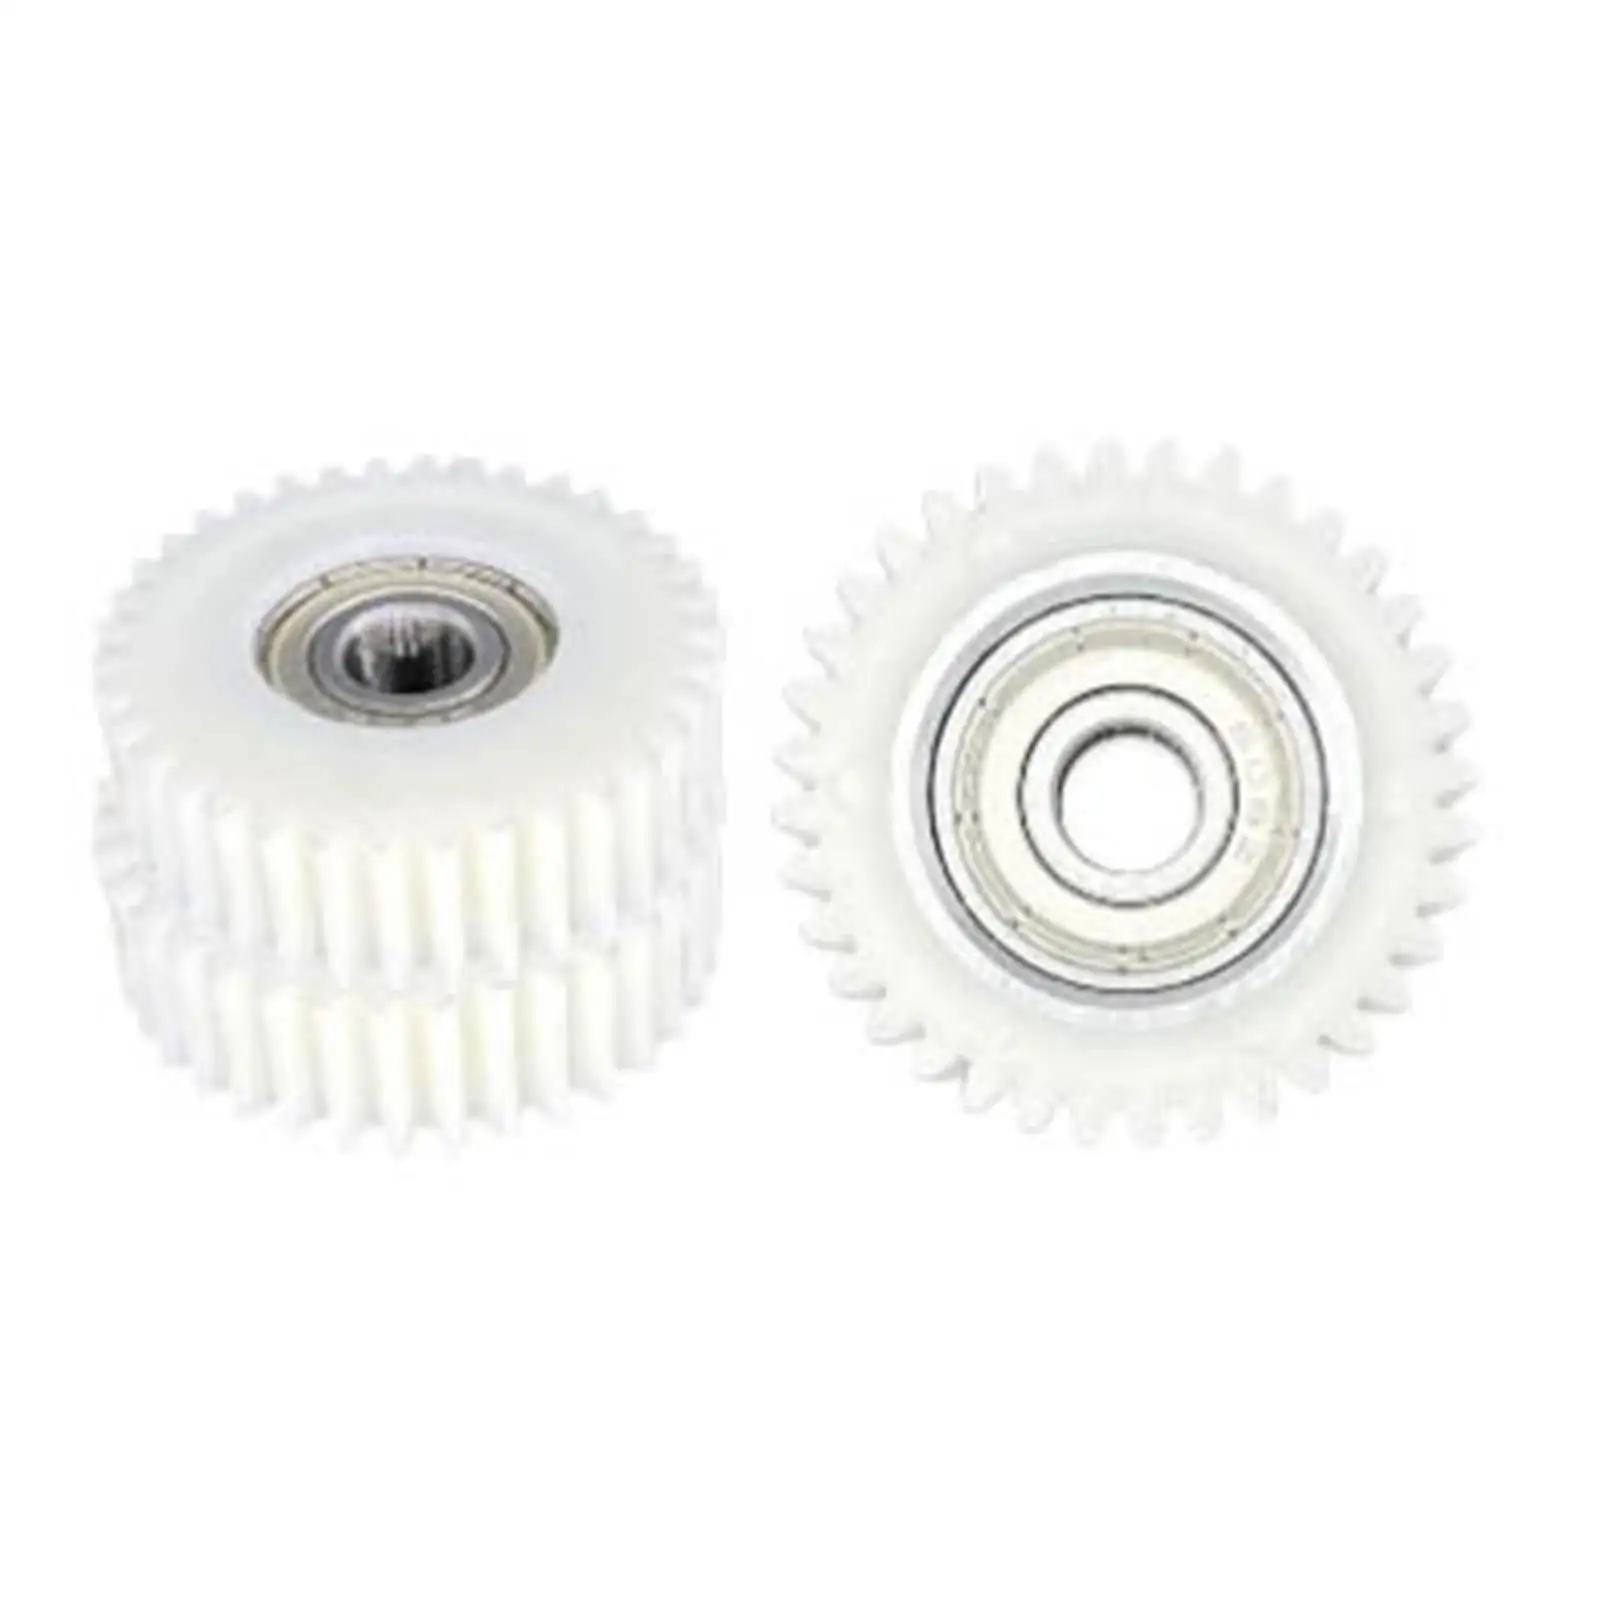 3x DurableNylon Electric Vehicle 36 Teeths Planetary Gears Set Part Replacement for Bicycle Bafang Motor Bearings Connector